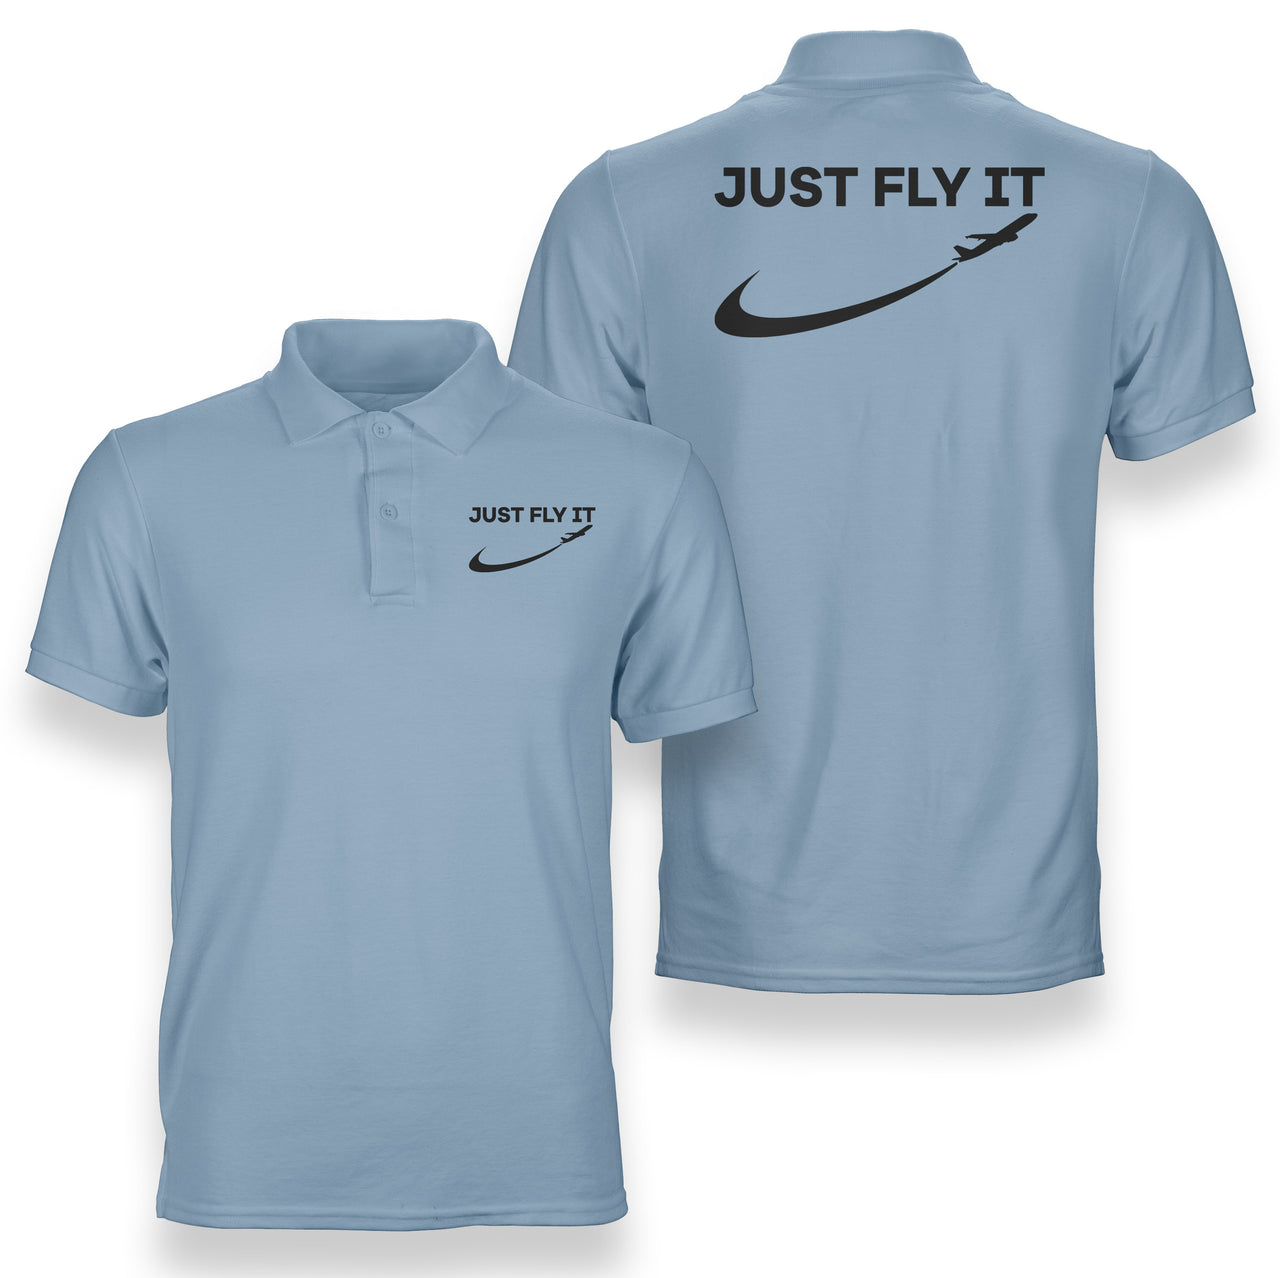 Just Fly It 2 Designed Double Side Polo T-Shirts